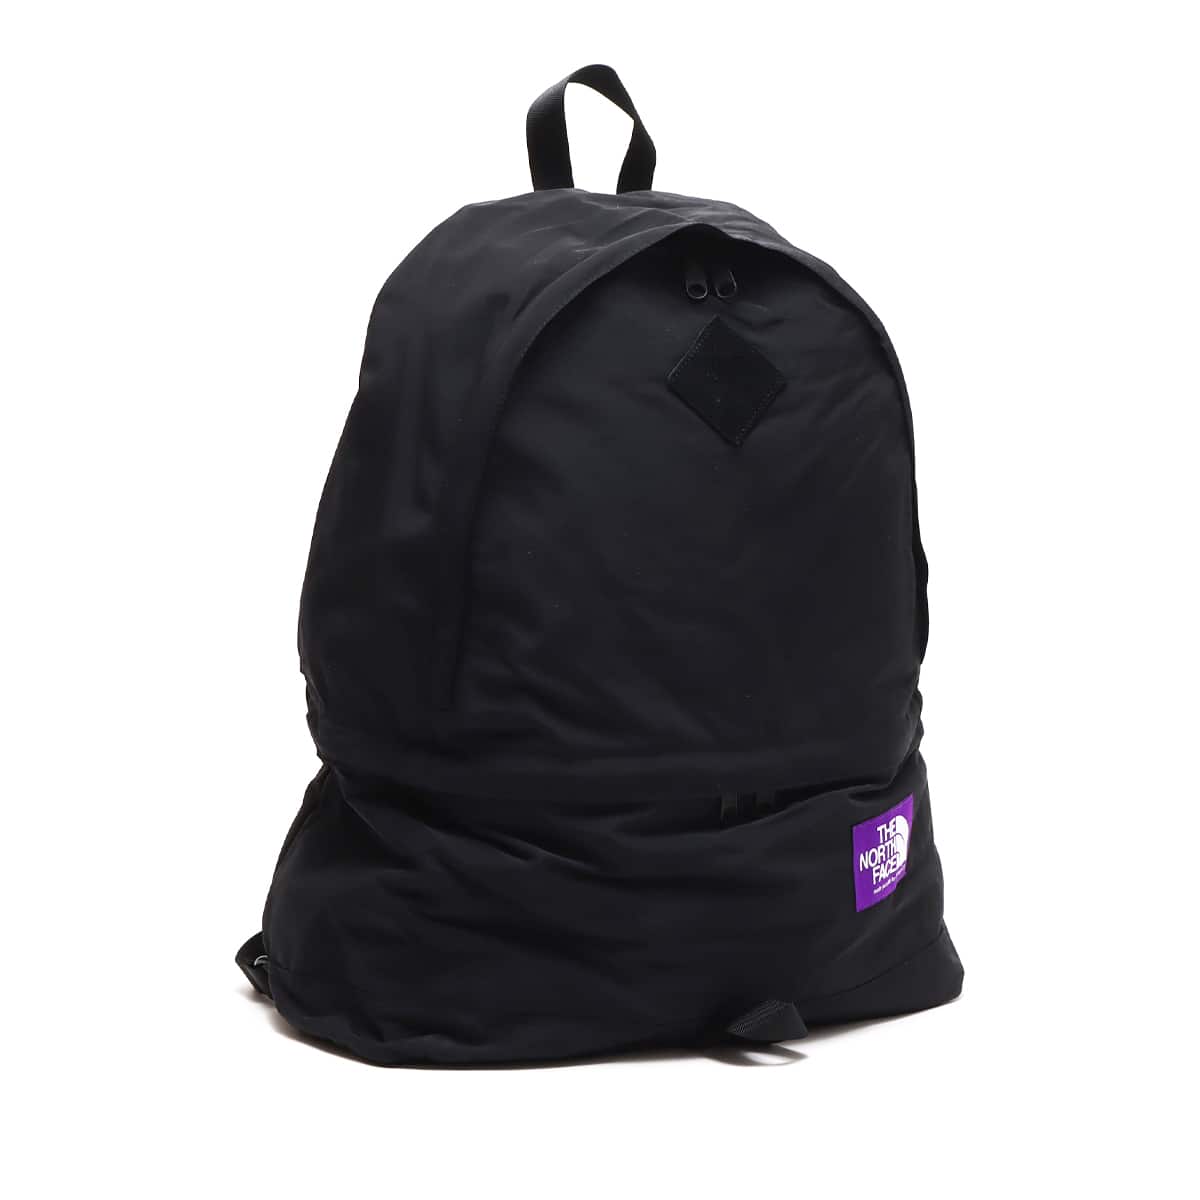 THE NORTH FACE PURPLE LABEL Field Day Pack Black X Black 22FW-I